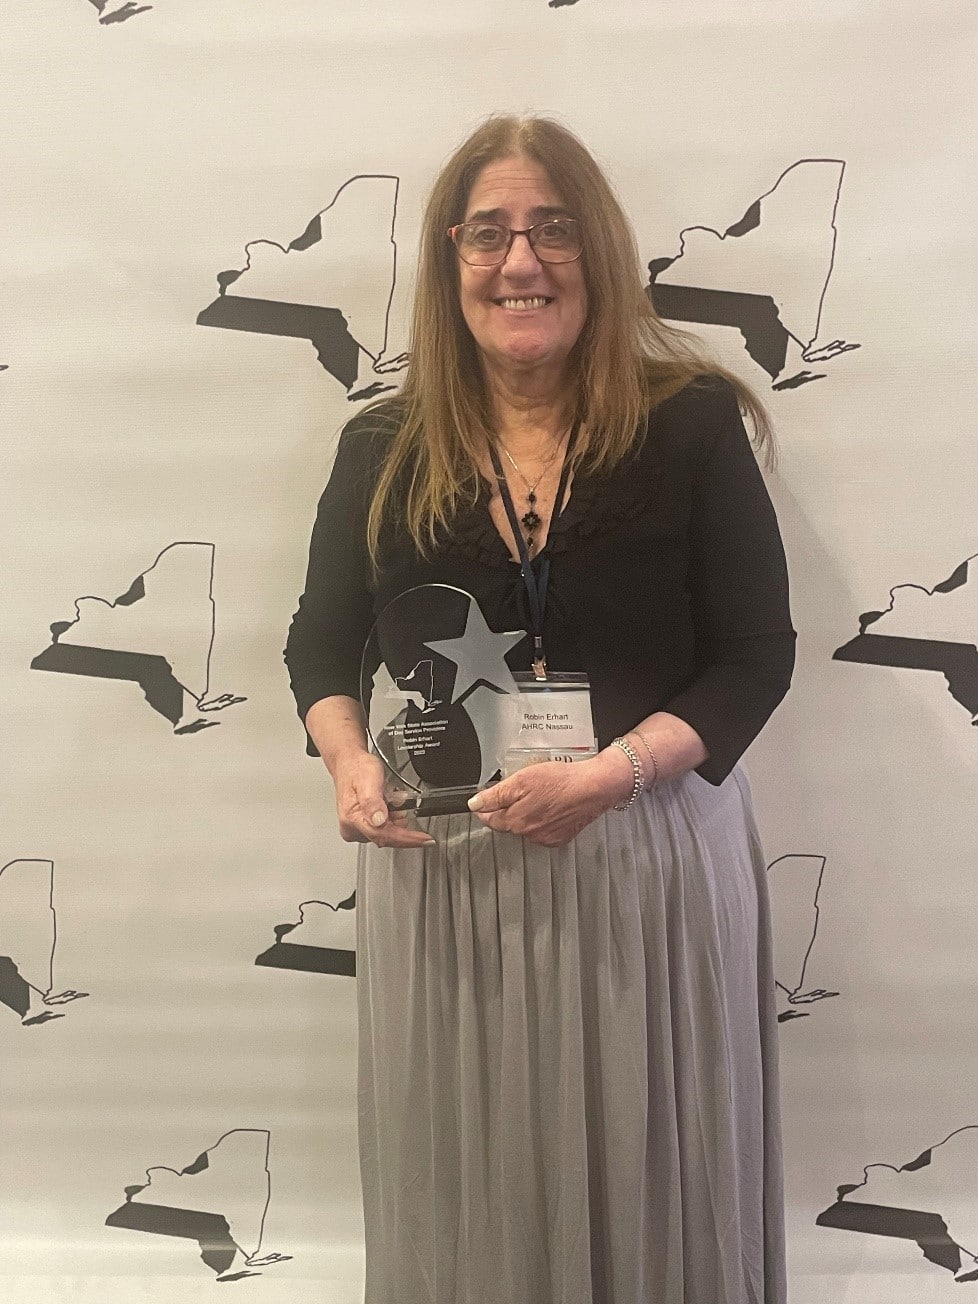 Robin Erhart poses with her award